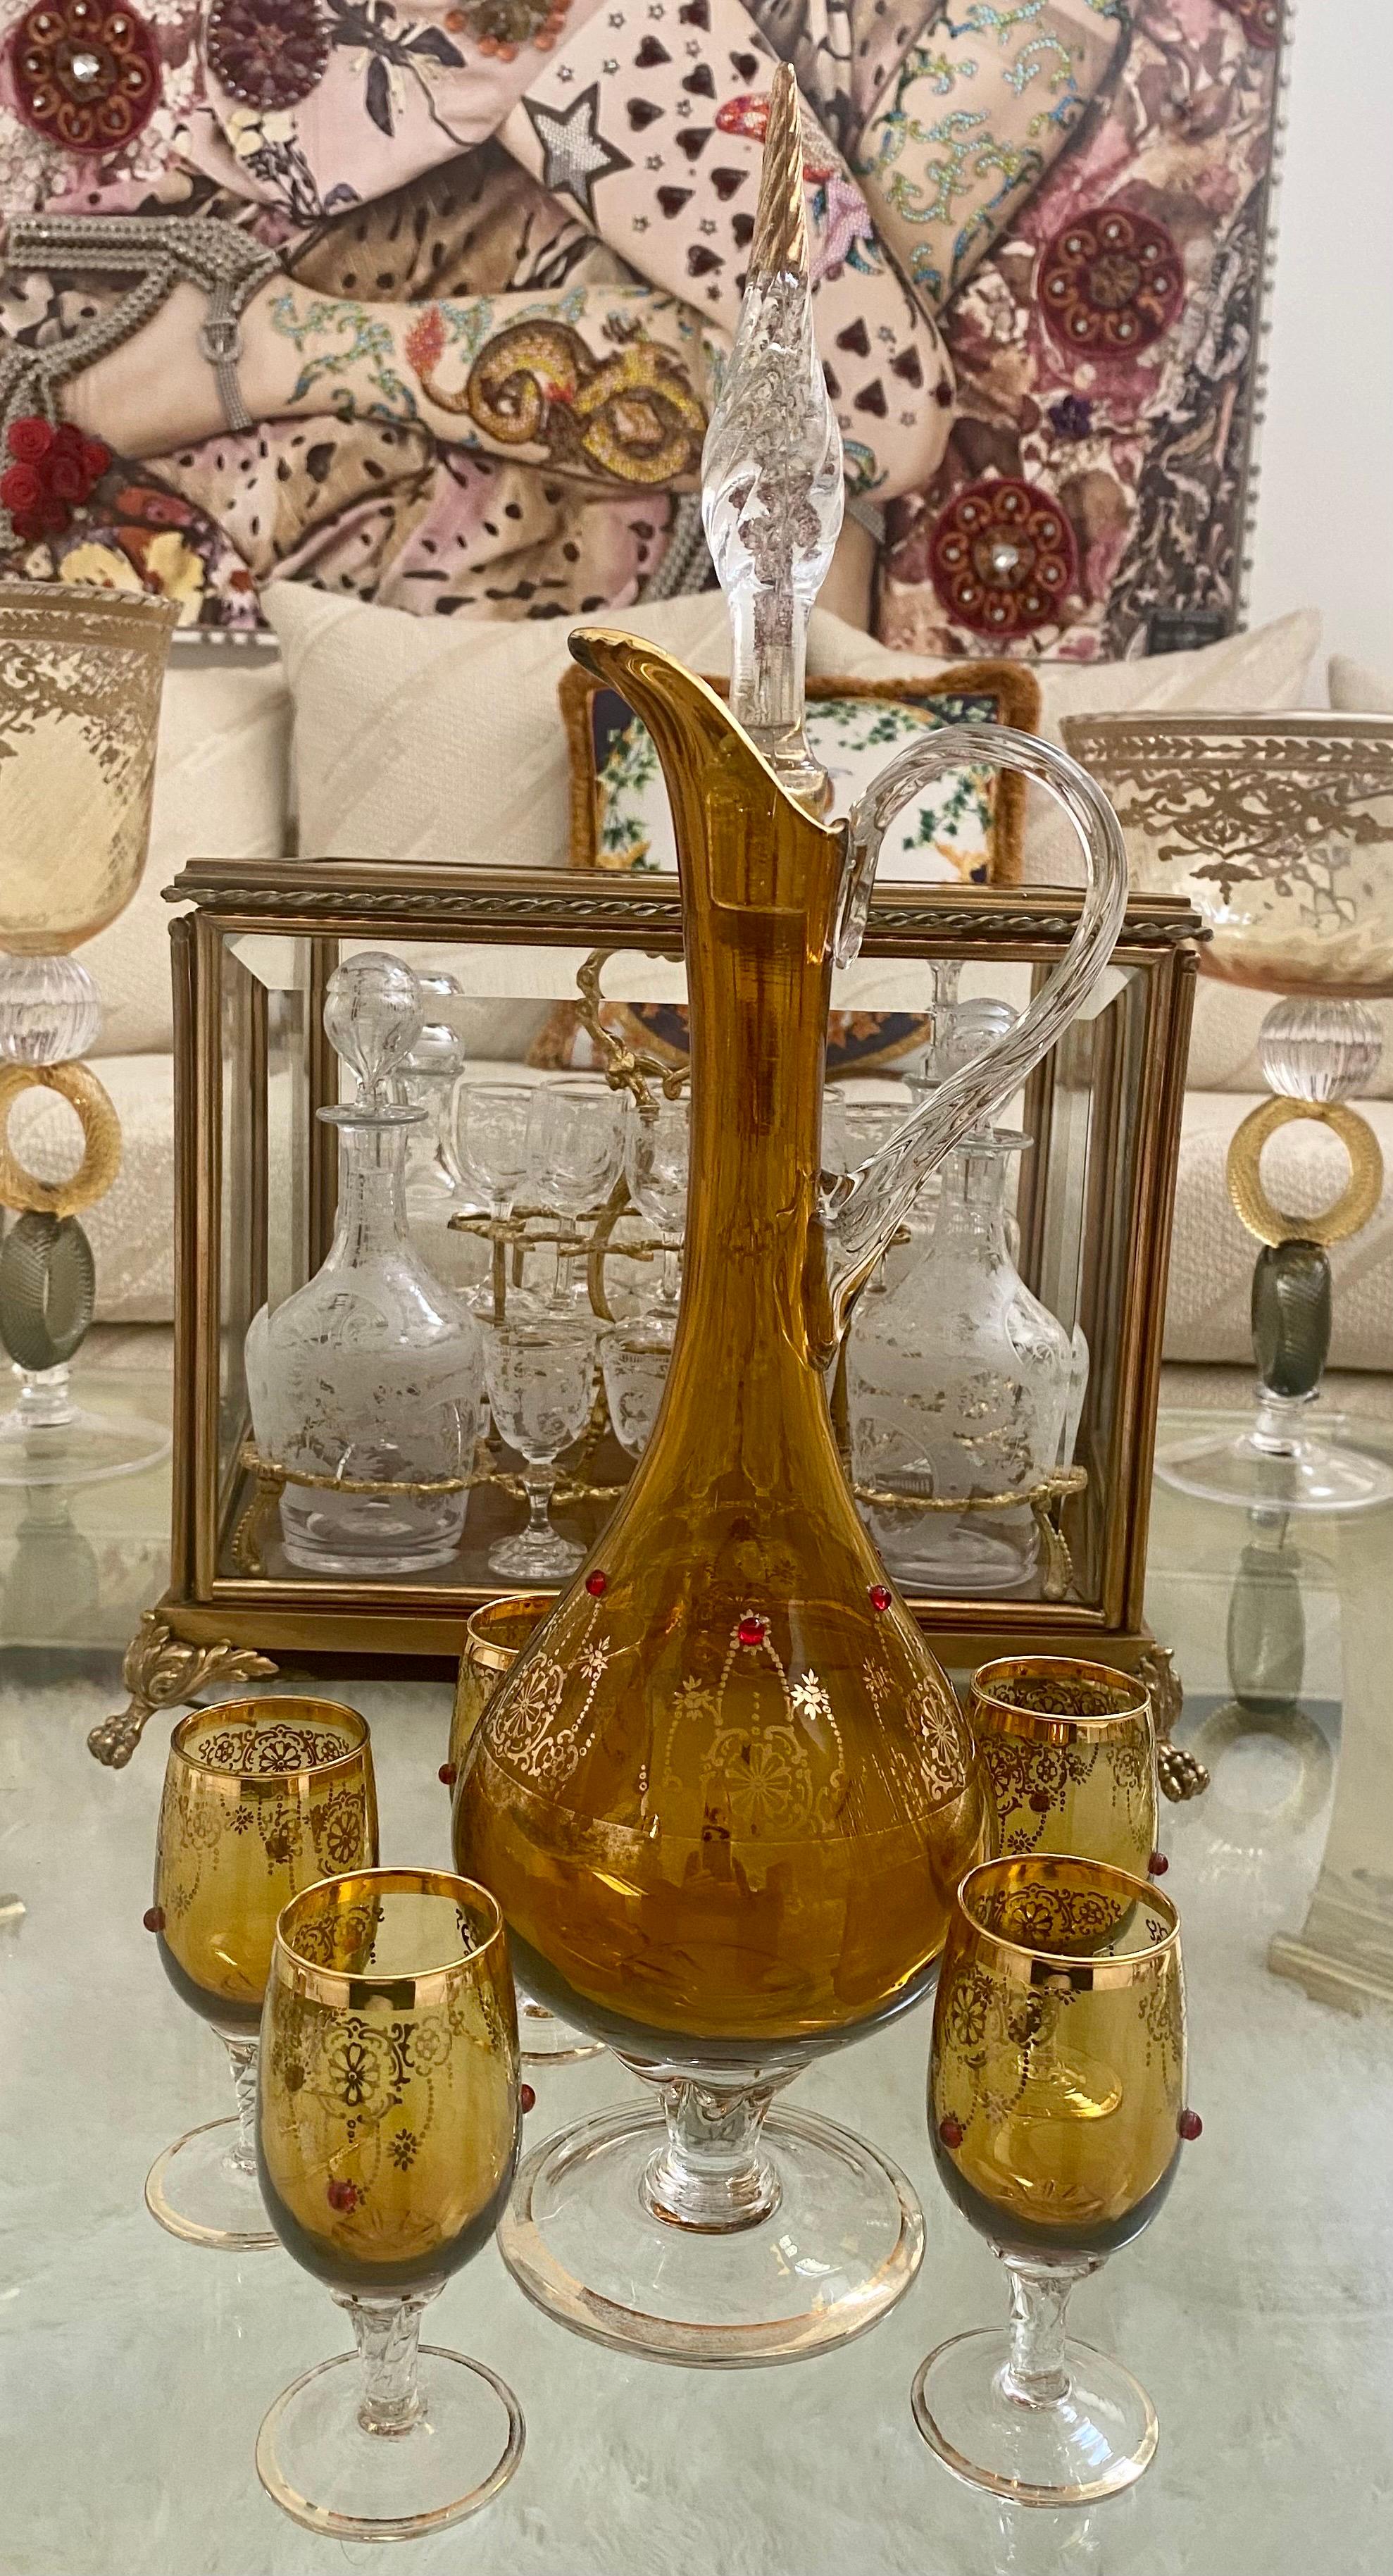 A lovely set of Venetian amber and clear glass consisting of a decanter, 17.25 inches tall, and 5 cordial glasses, 3.5 inched tall. The set is trimmed and embellished with gold. Each piece is decorated with red enamel. This set would be a beautiful